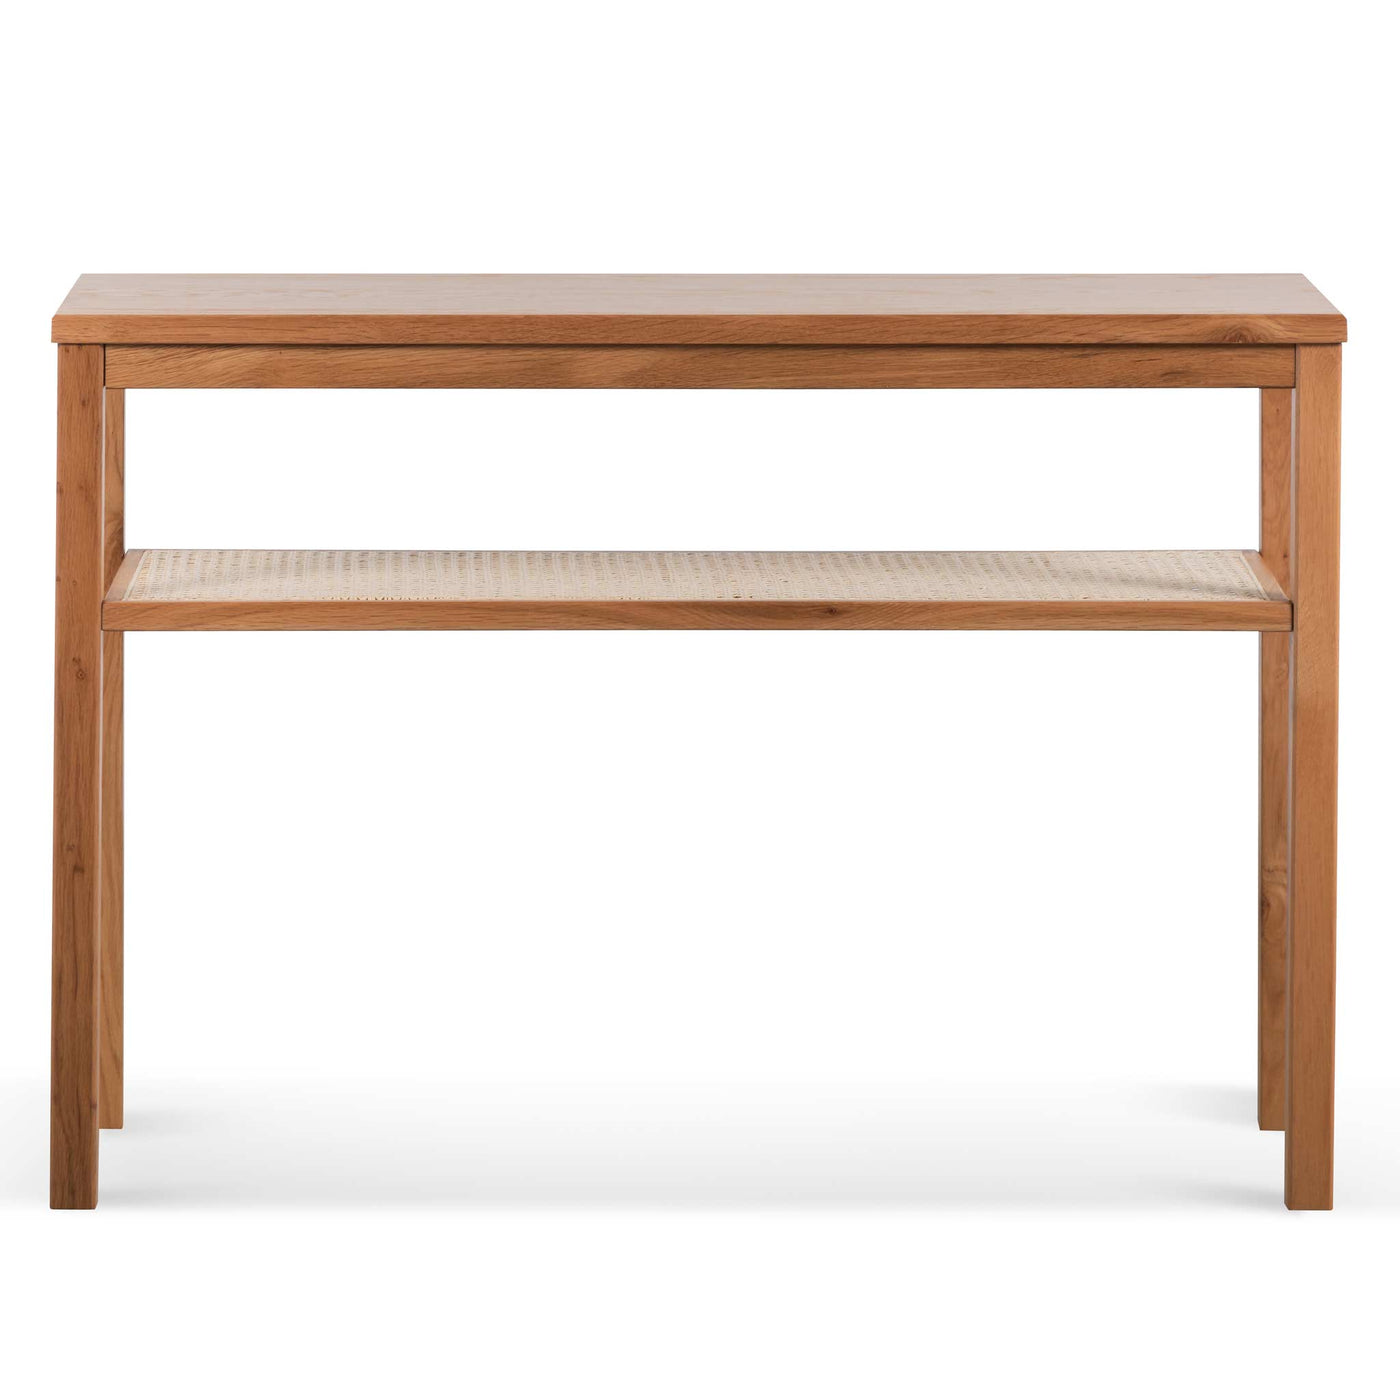 1.10m Wooden Console Table - Natural